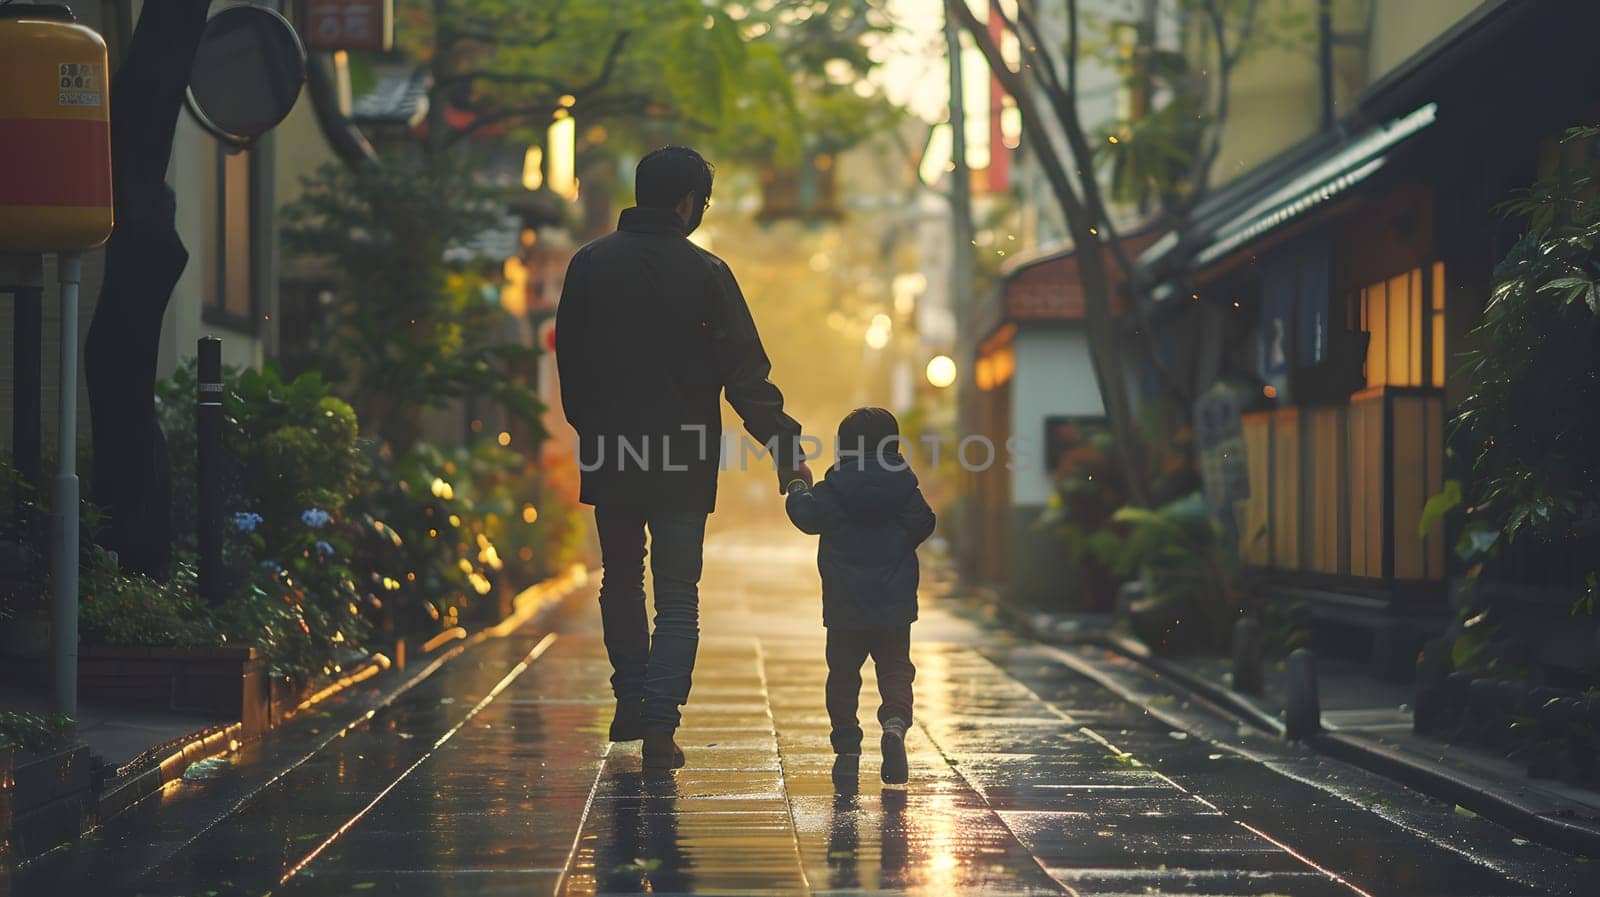 A man and a child are strolling along a damp street, their hands intertwined. The gentle light reflects off the wet asphalt, creating a serene atmosphere